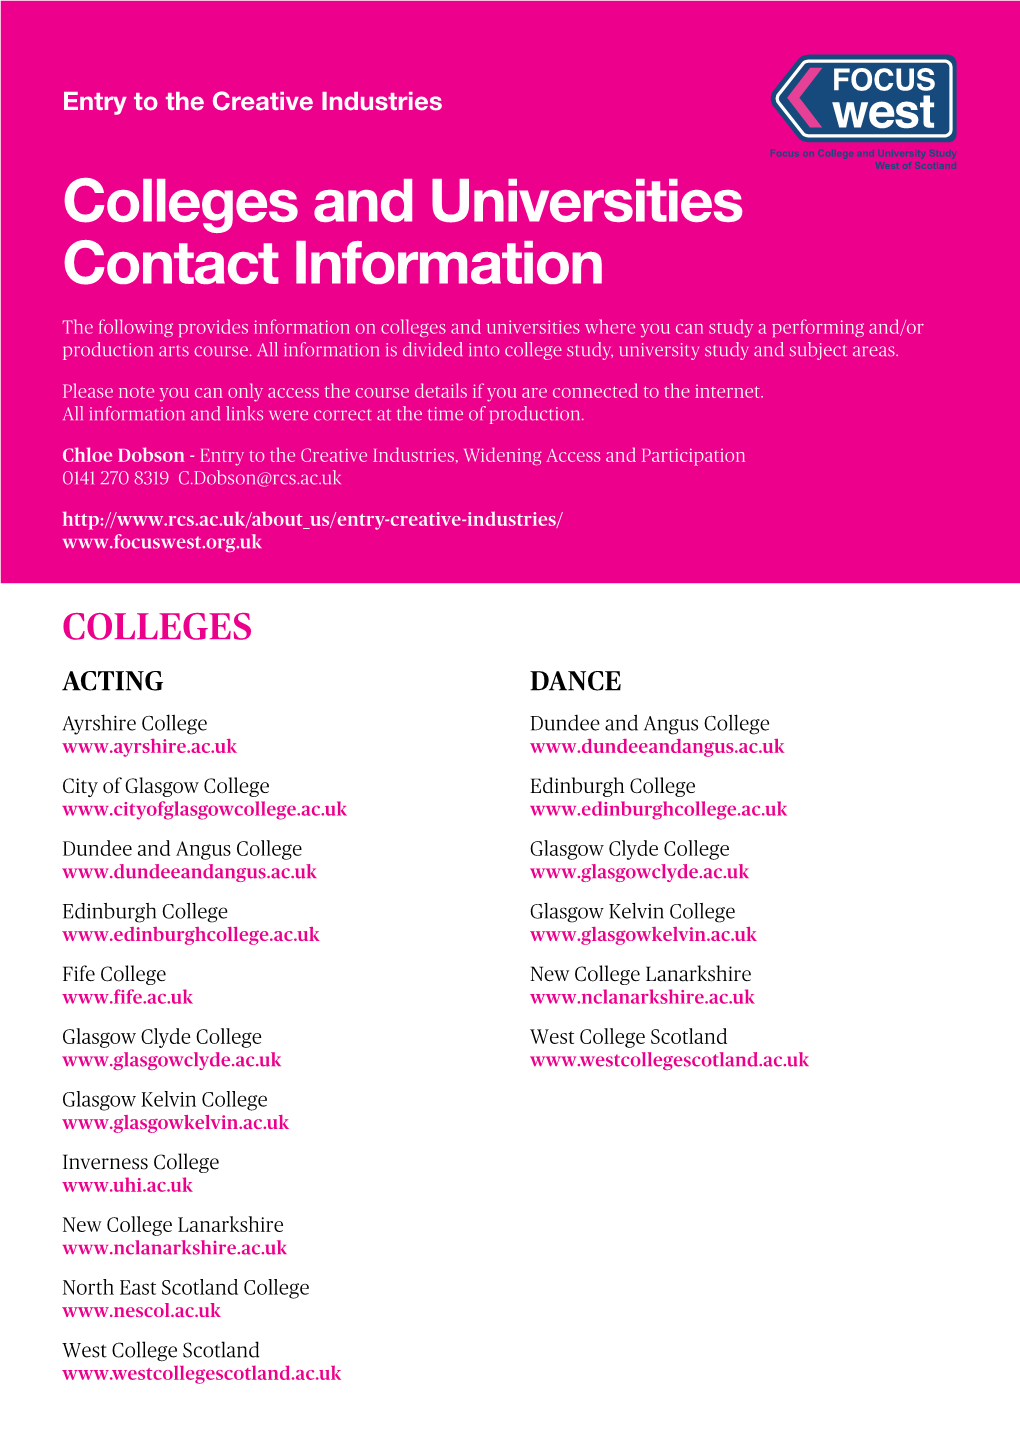 Colleges and Universities Contact Information